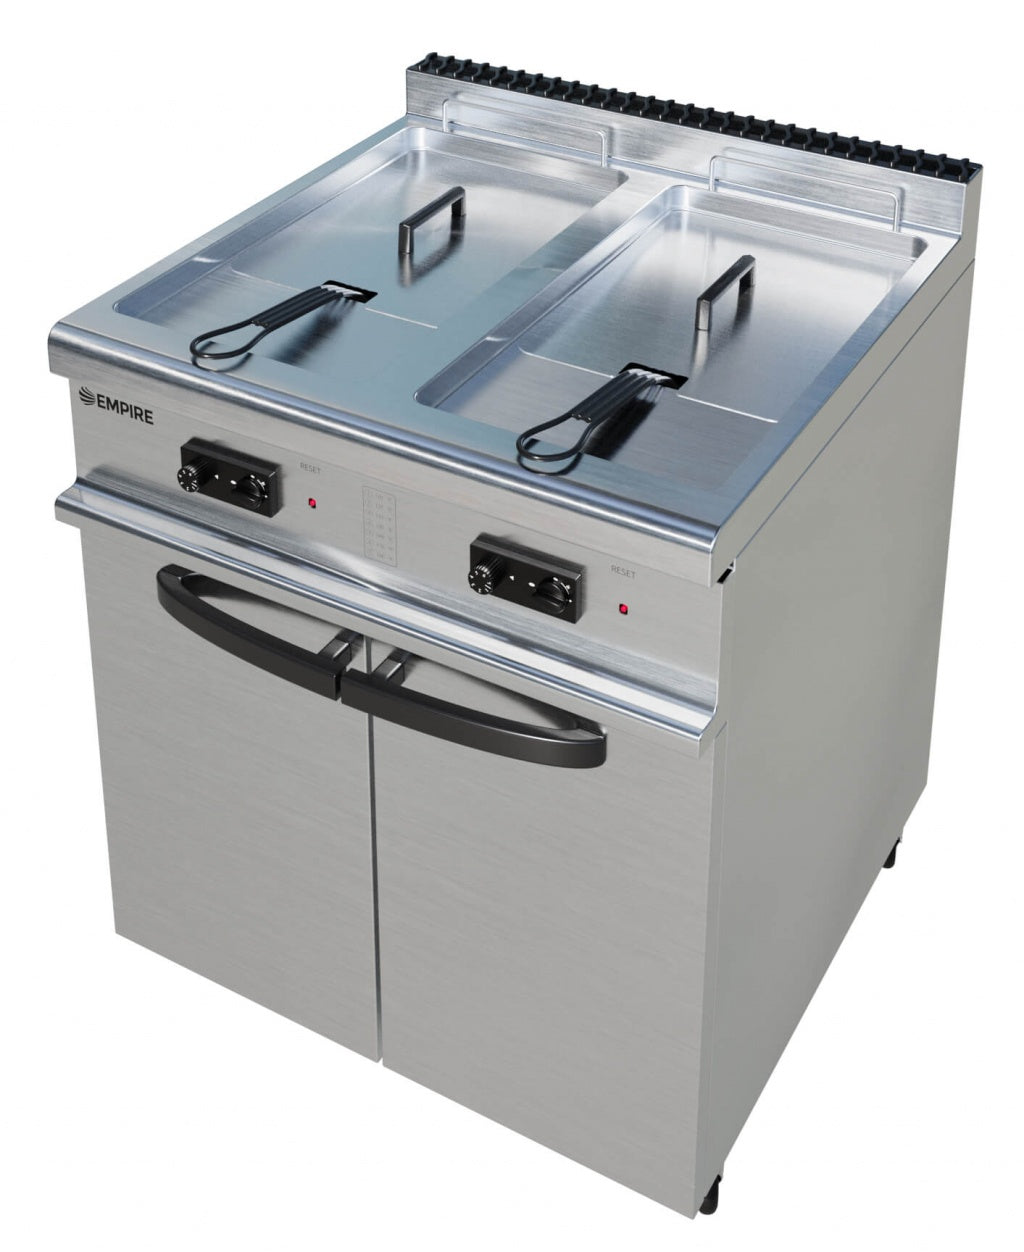 Empire Twin Basket Twin Tank Free Standing Gas Fryer 6 Burner With LPG Conversion Kit 2 x 20Ltr - EMP-TG70-QC-2 Freestanding Gas Fyers Empire   